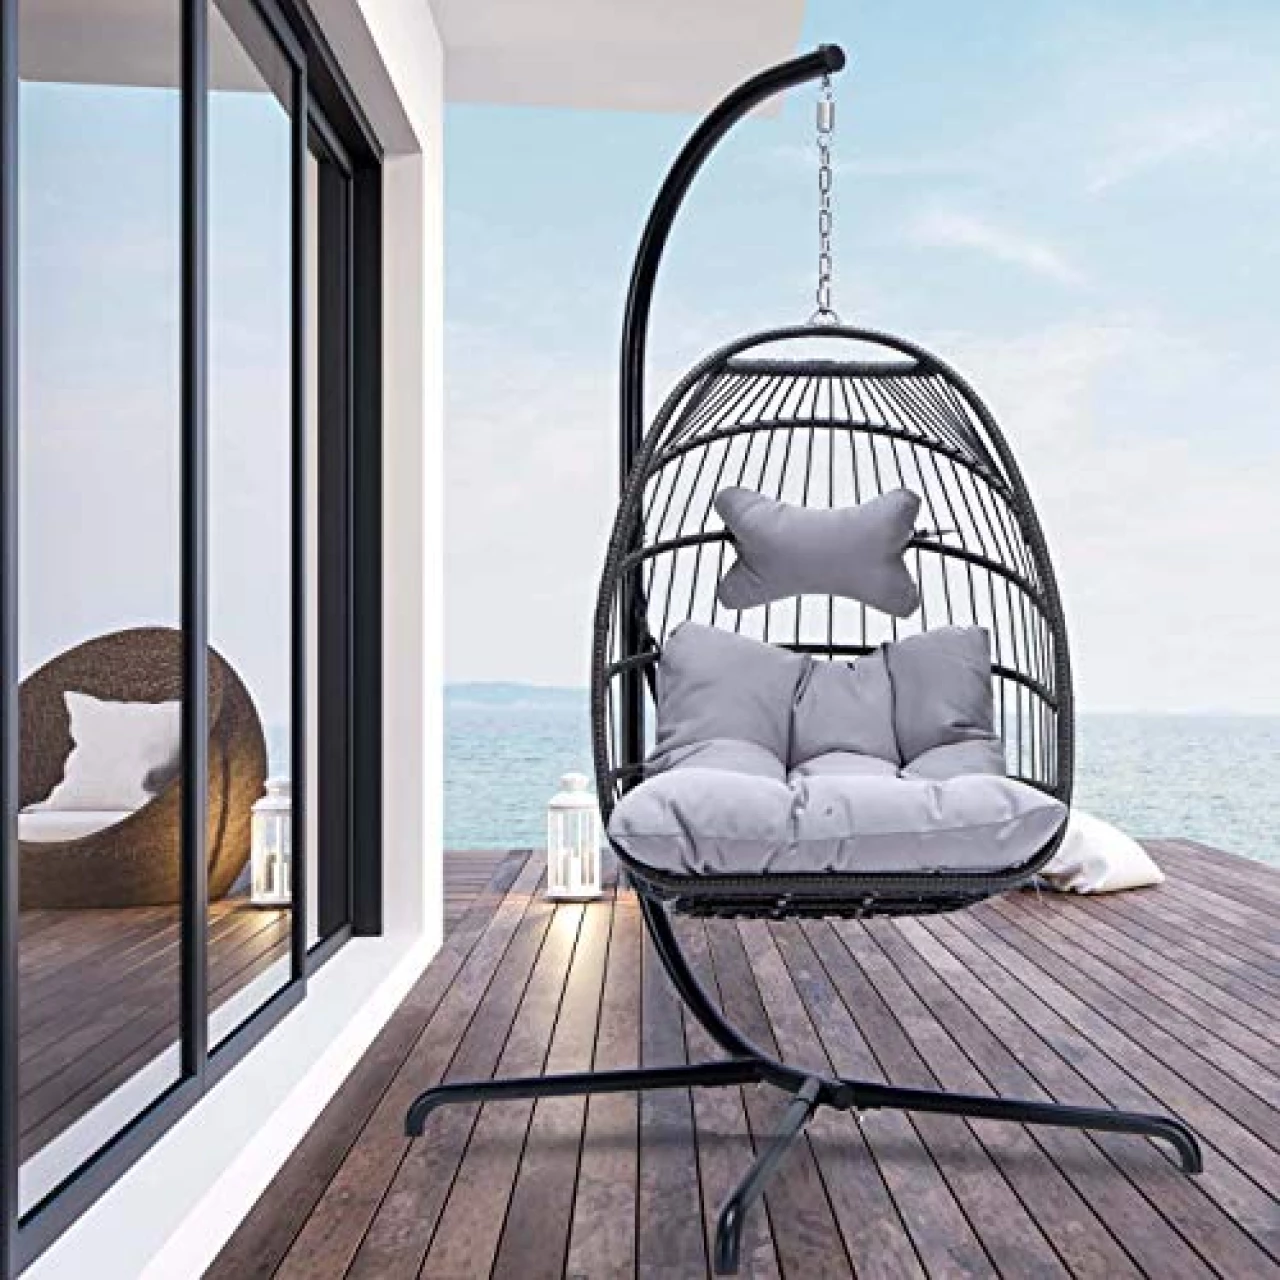 NICESOUL® Indoor Outdoor Patio Wicker Hanging Egg Chair Swing Hammock Egg Chairs UV Resistant Cushions 350lbs Capaticy for Patio Bedroom Balcony (Grey)